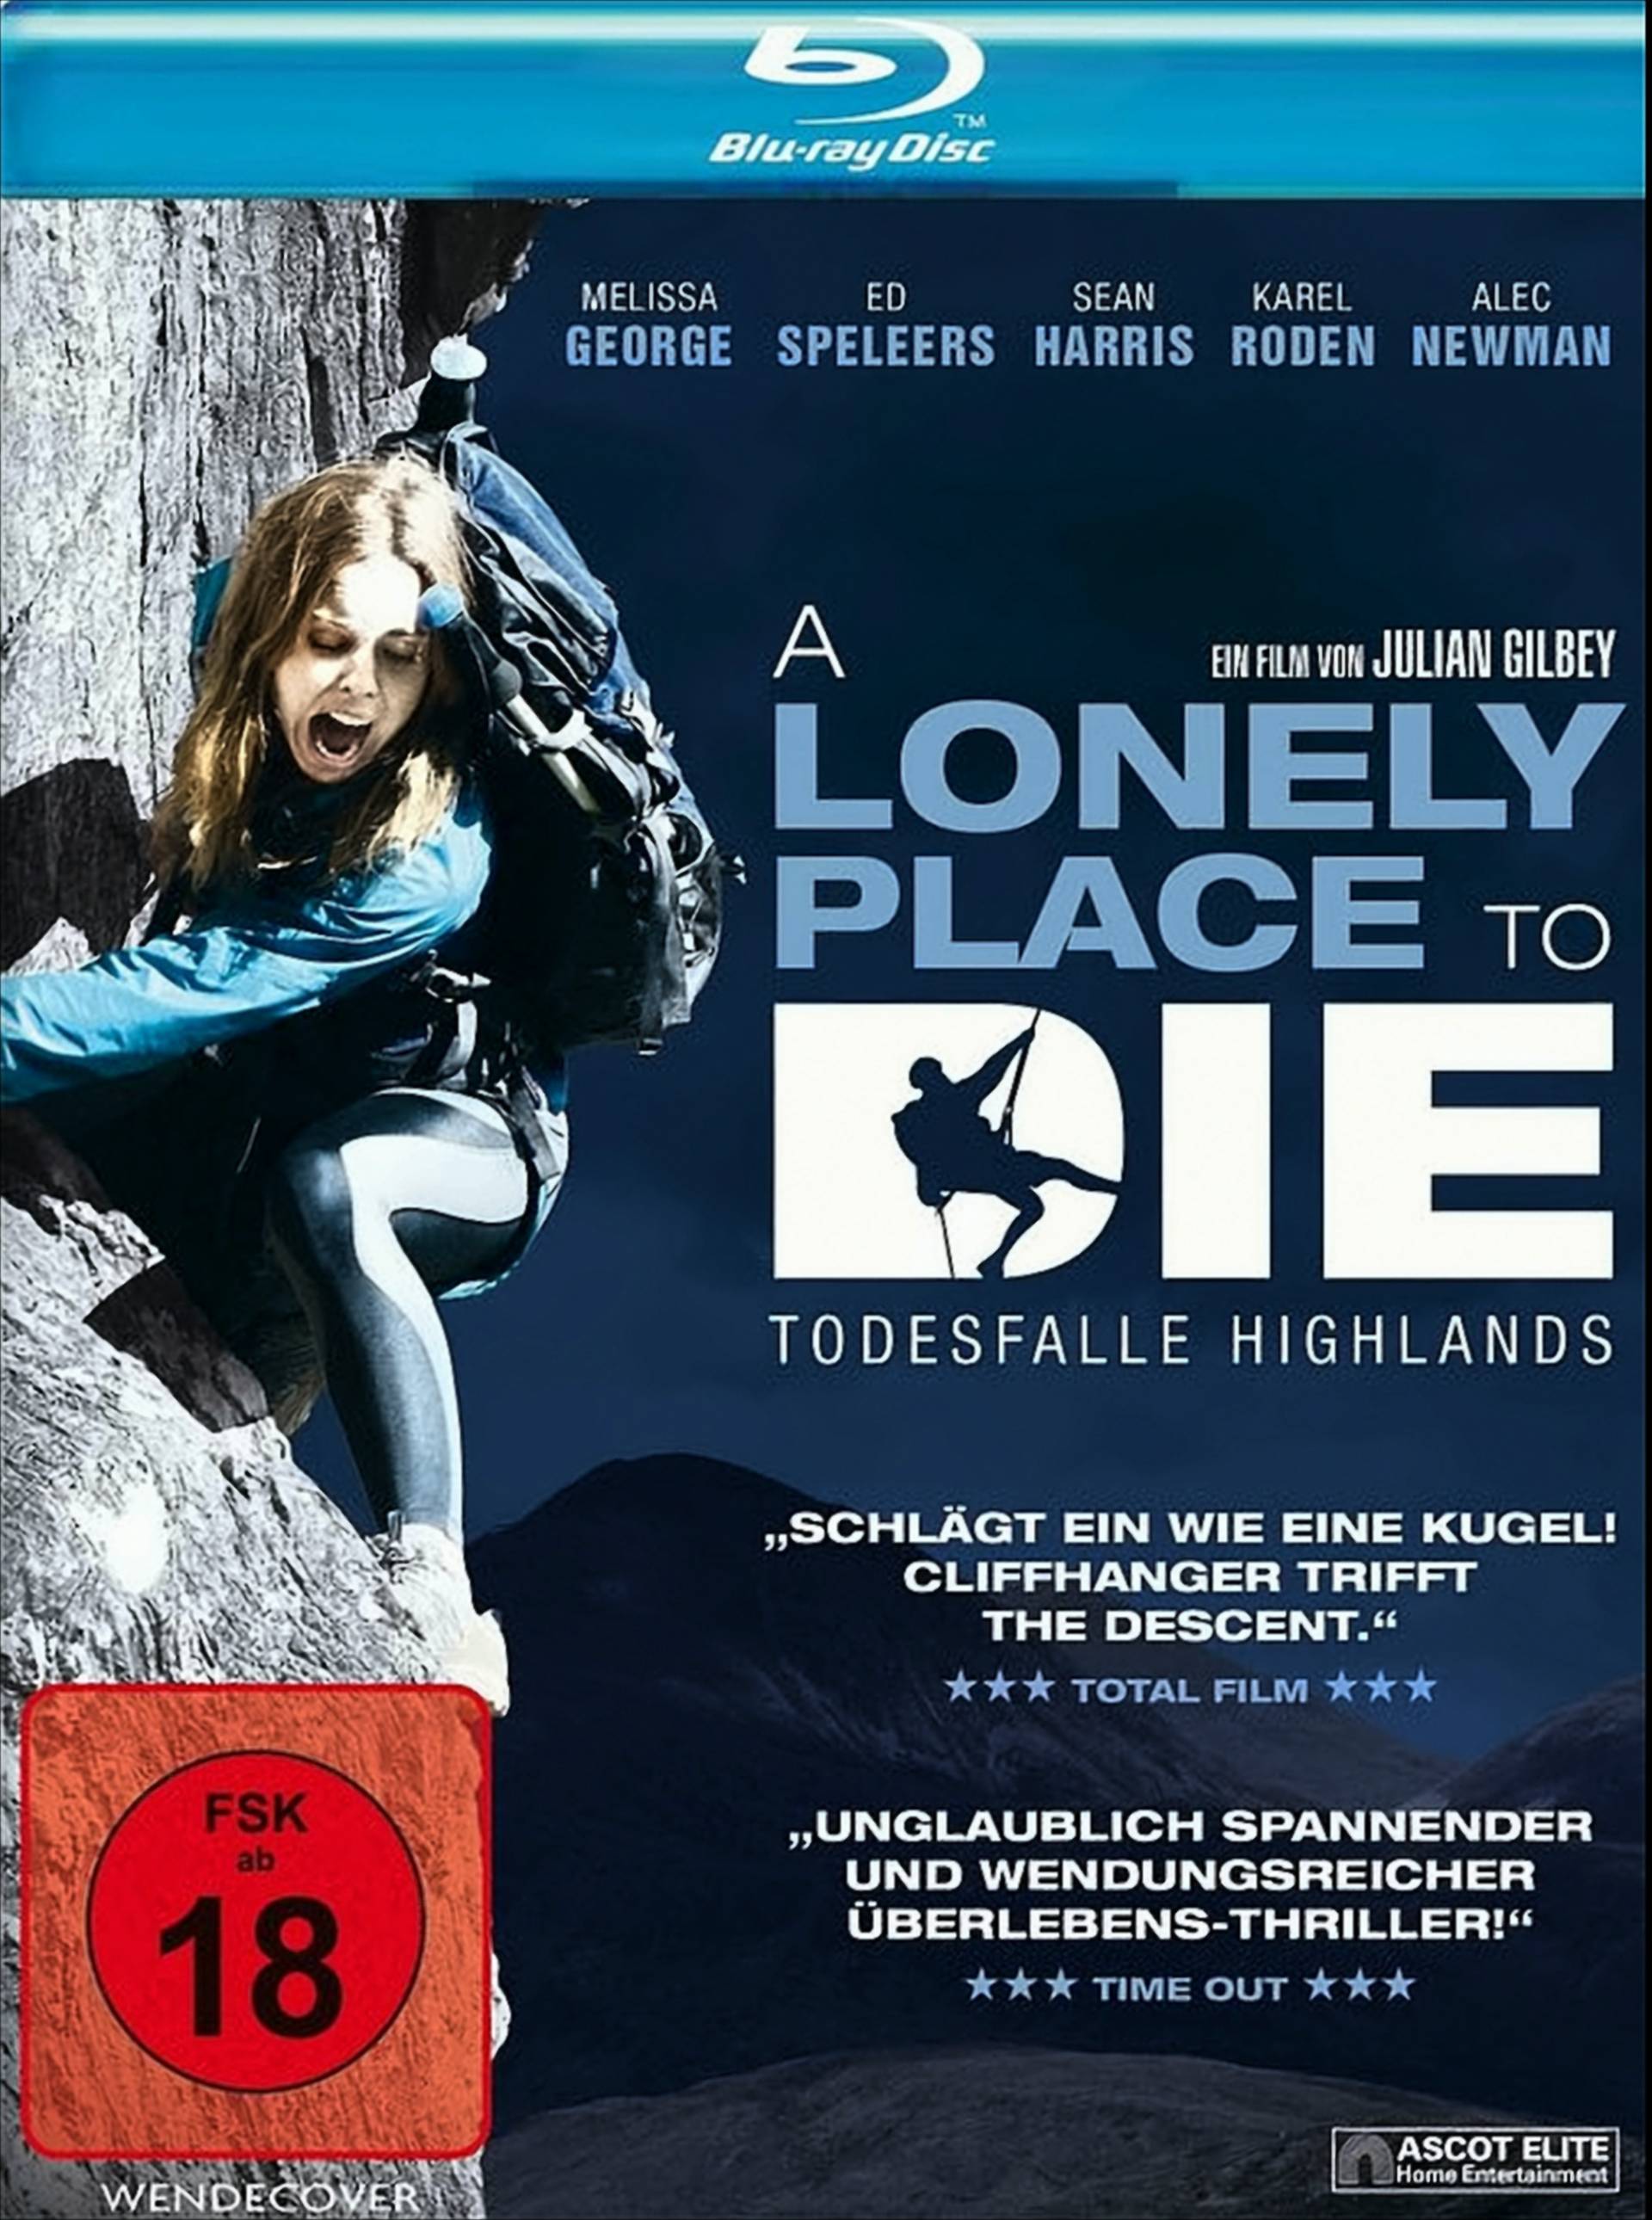 A Lonely Place to Die Todesfalle Highlands von Ascot Elite